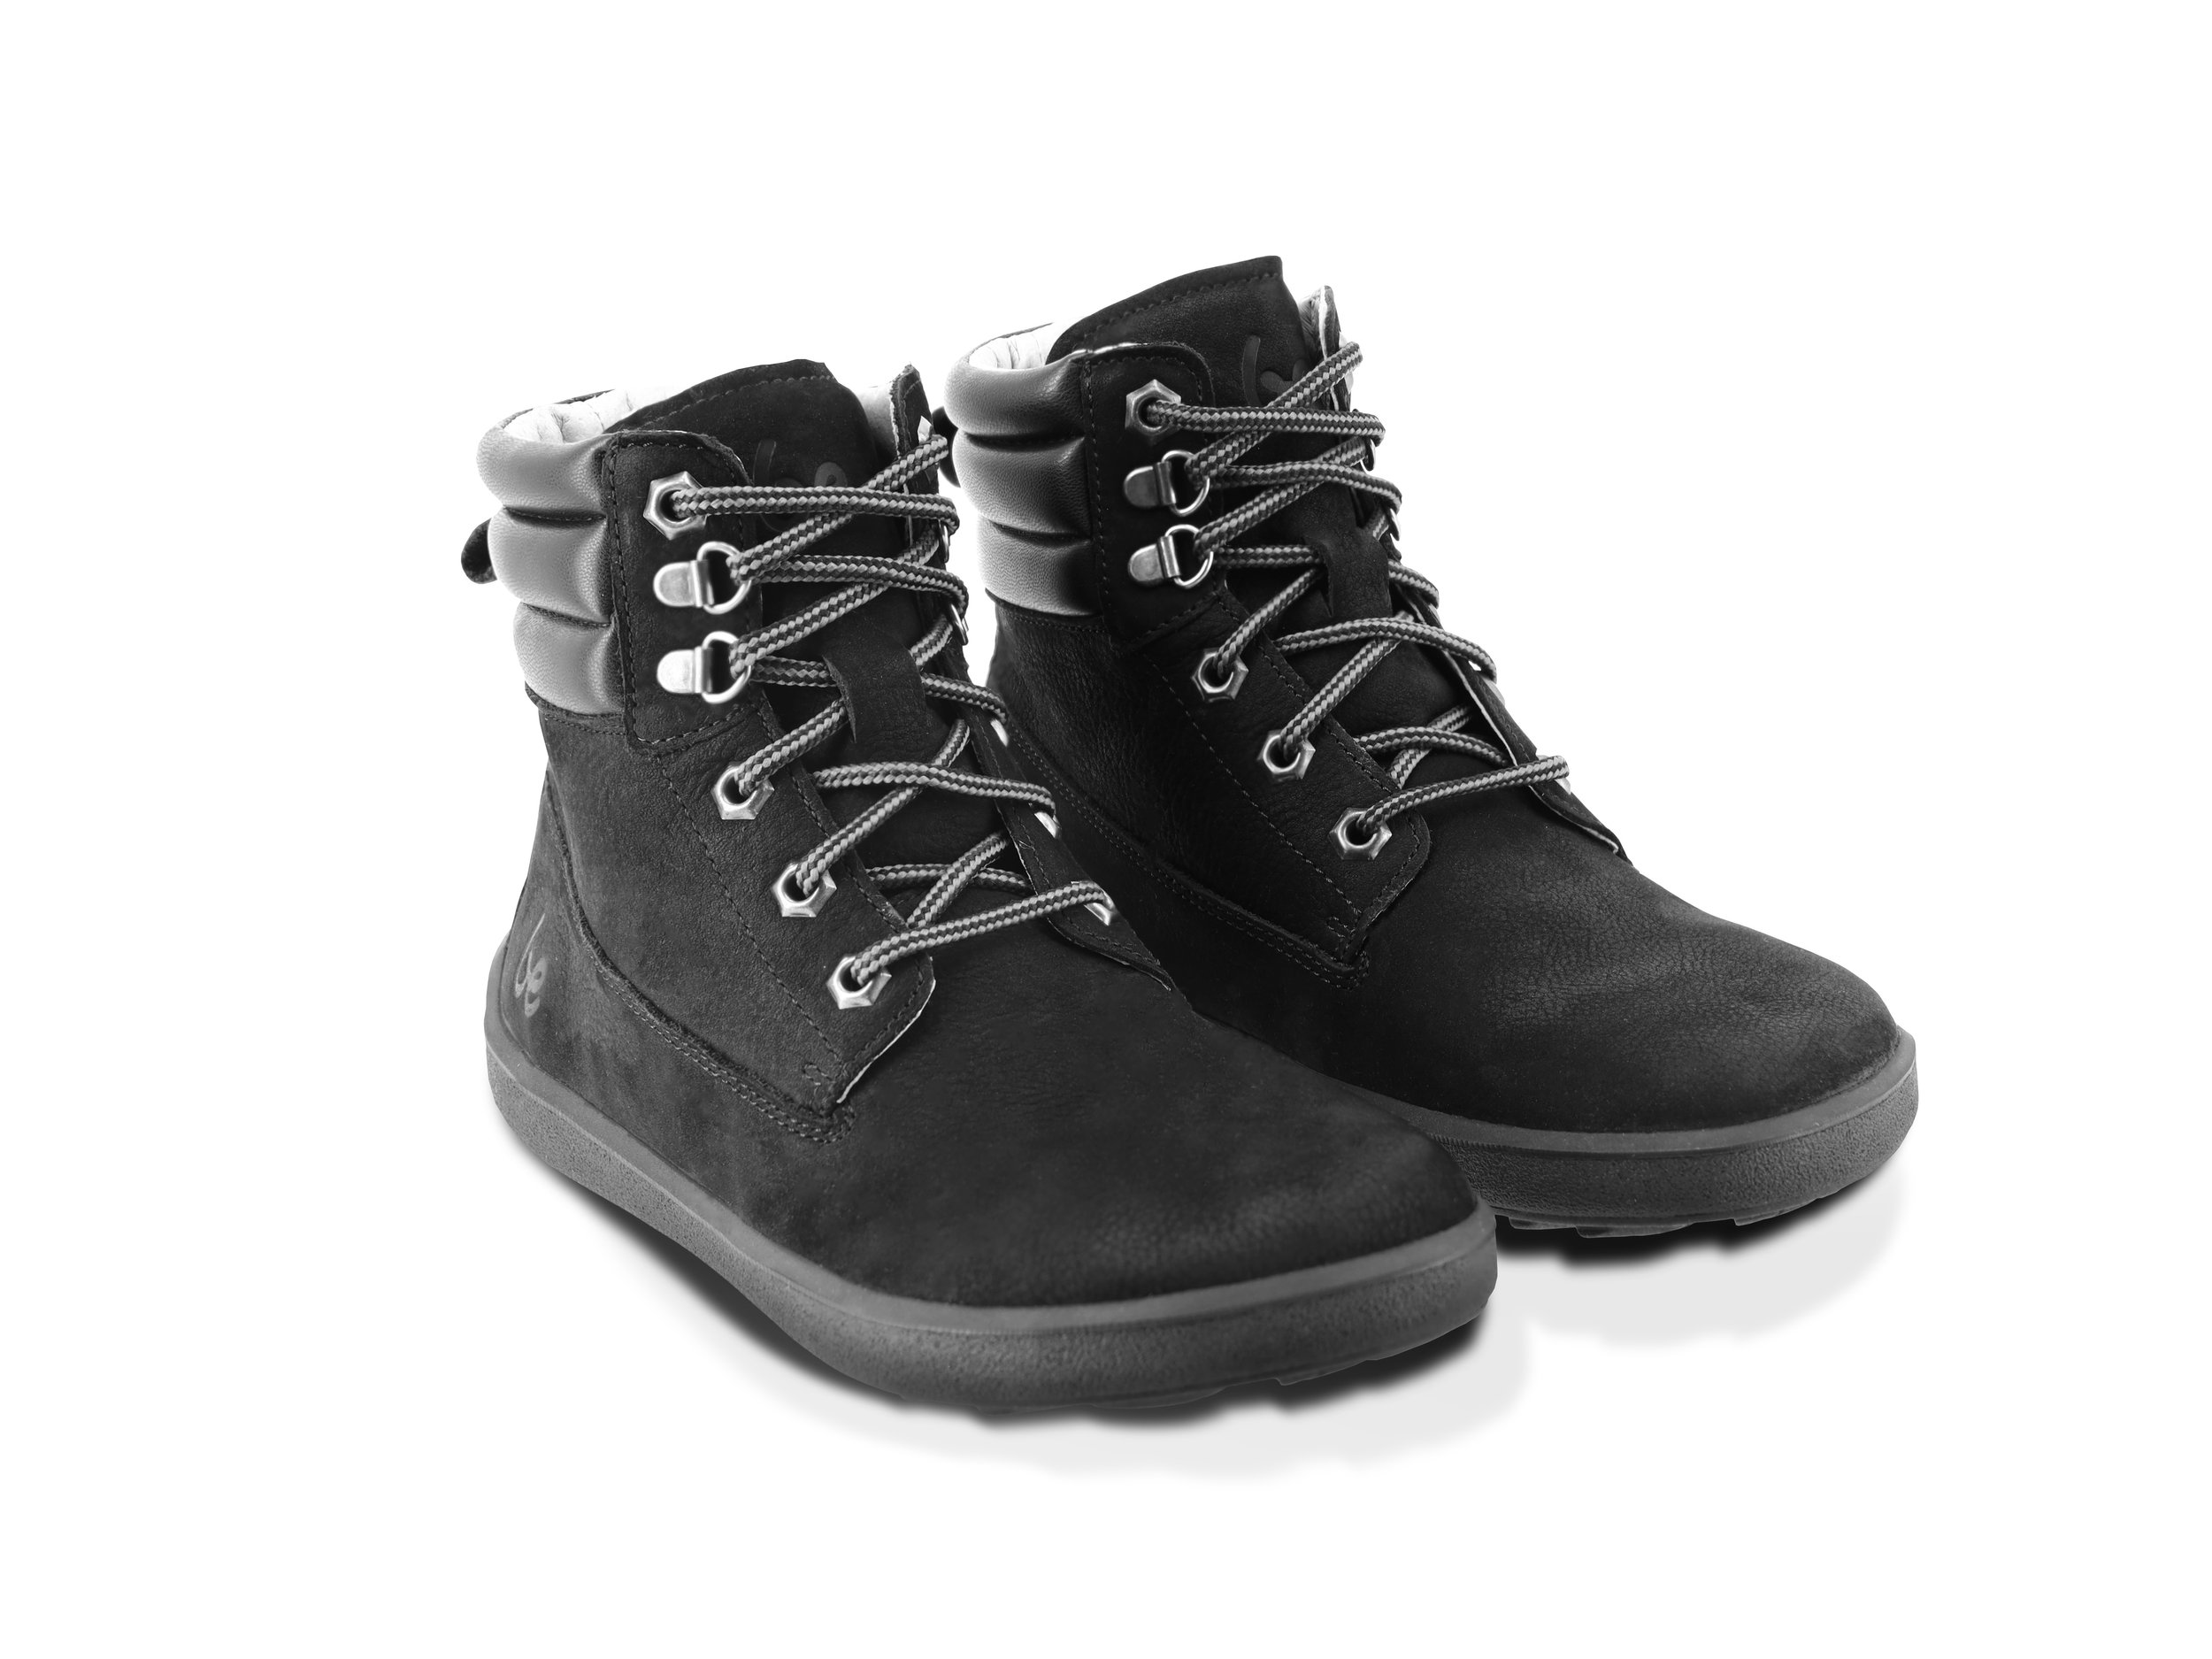 Timberland Women Genuine Leather Outdoor Hiking Sneaker Boots Shoes Size 6M  | eBay